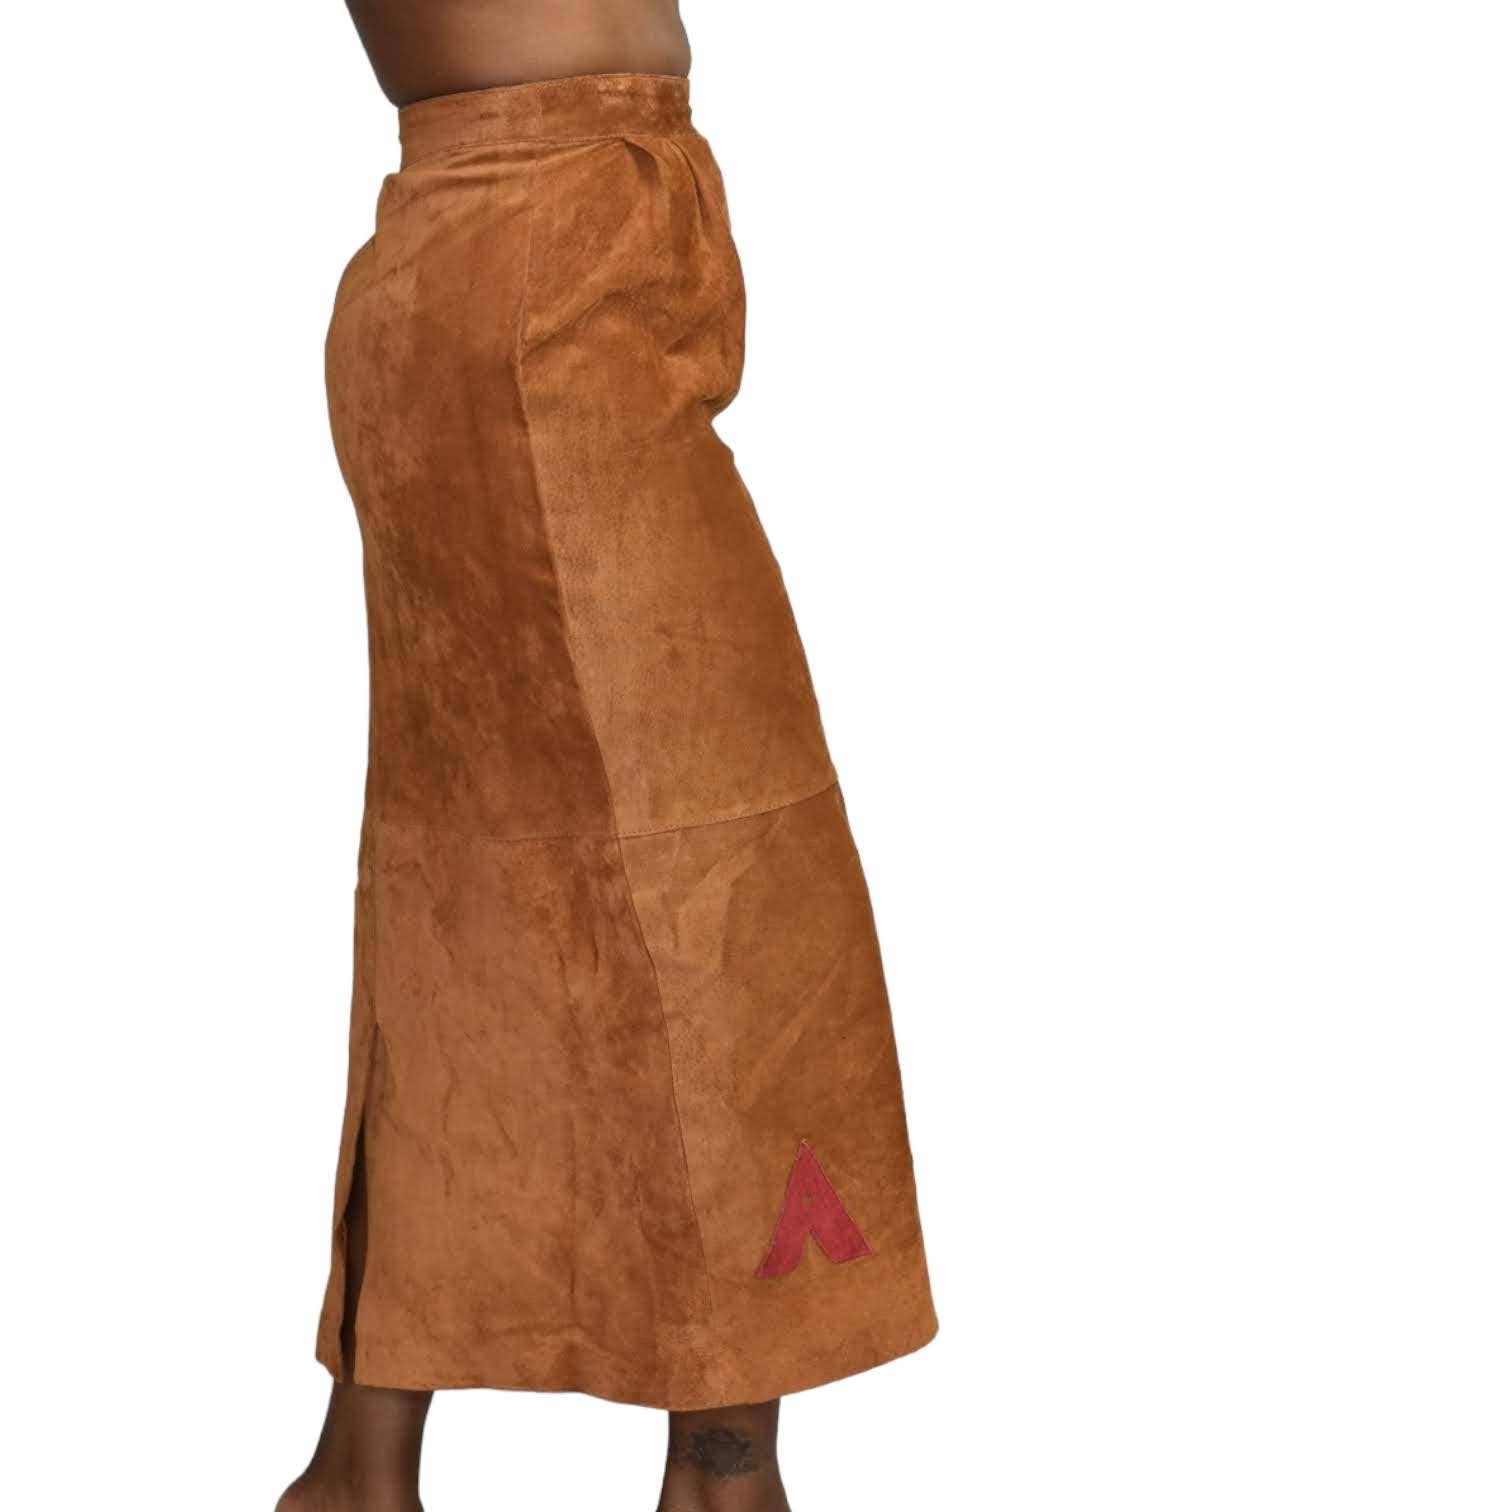 Eagles Eye Suede Skirt Embroidered Vintage Straight Column Midi Tribal Leather Brown Camel Size 2 XS